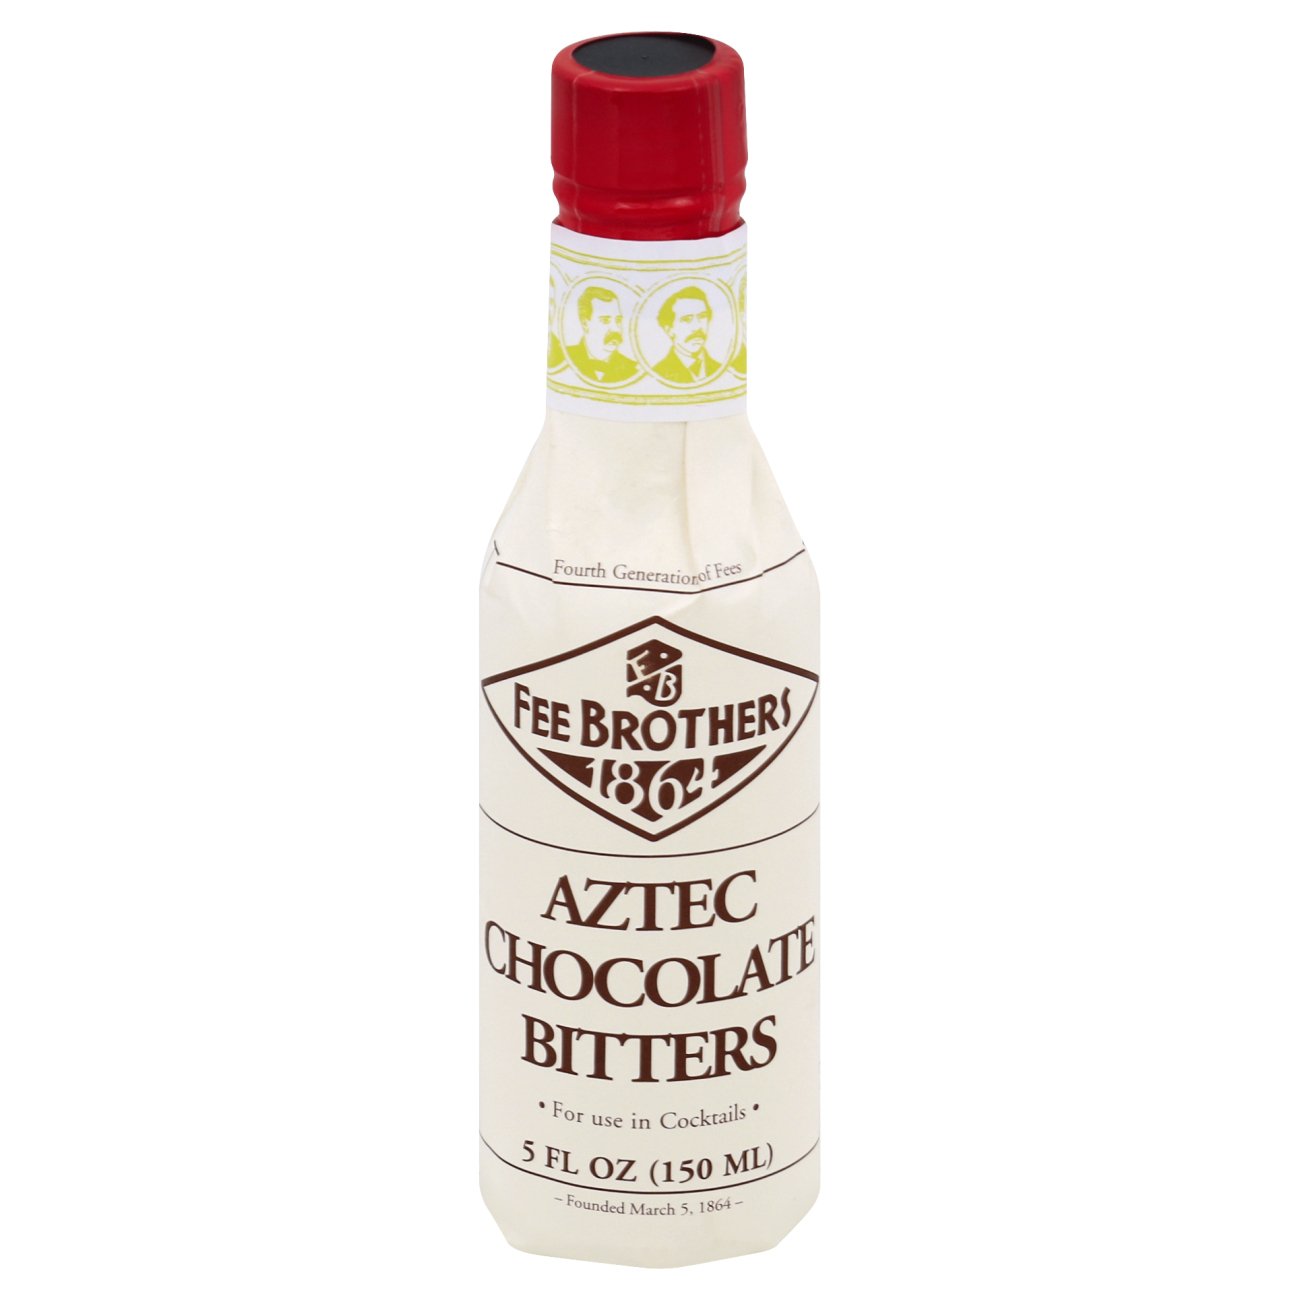 Fee Brothers Aztec Chocolate Bitters - Shop Cocktail Mixers at H-E-B